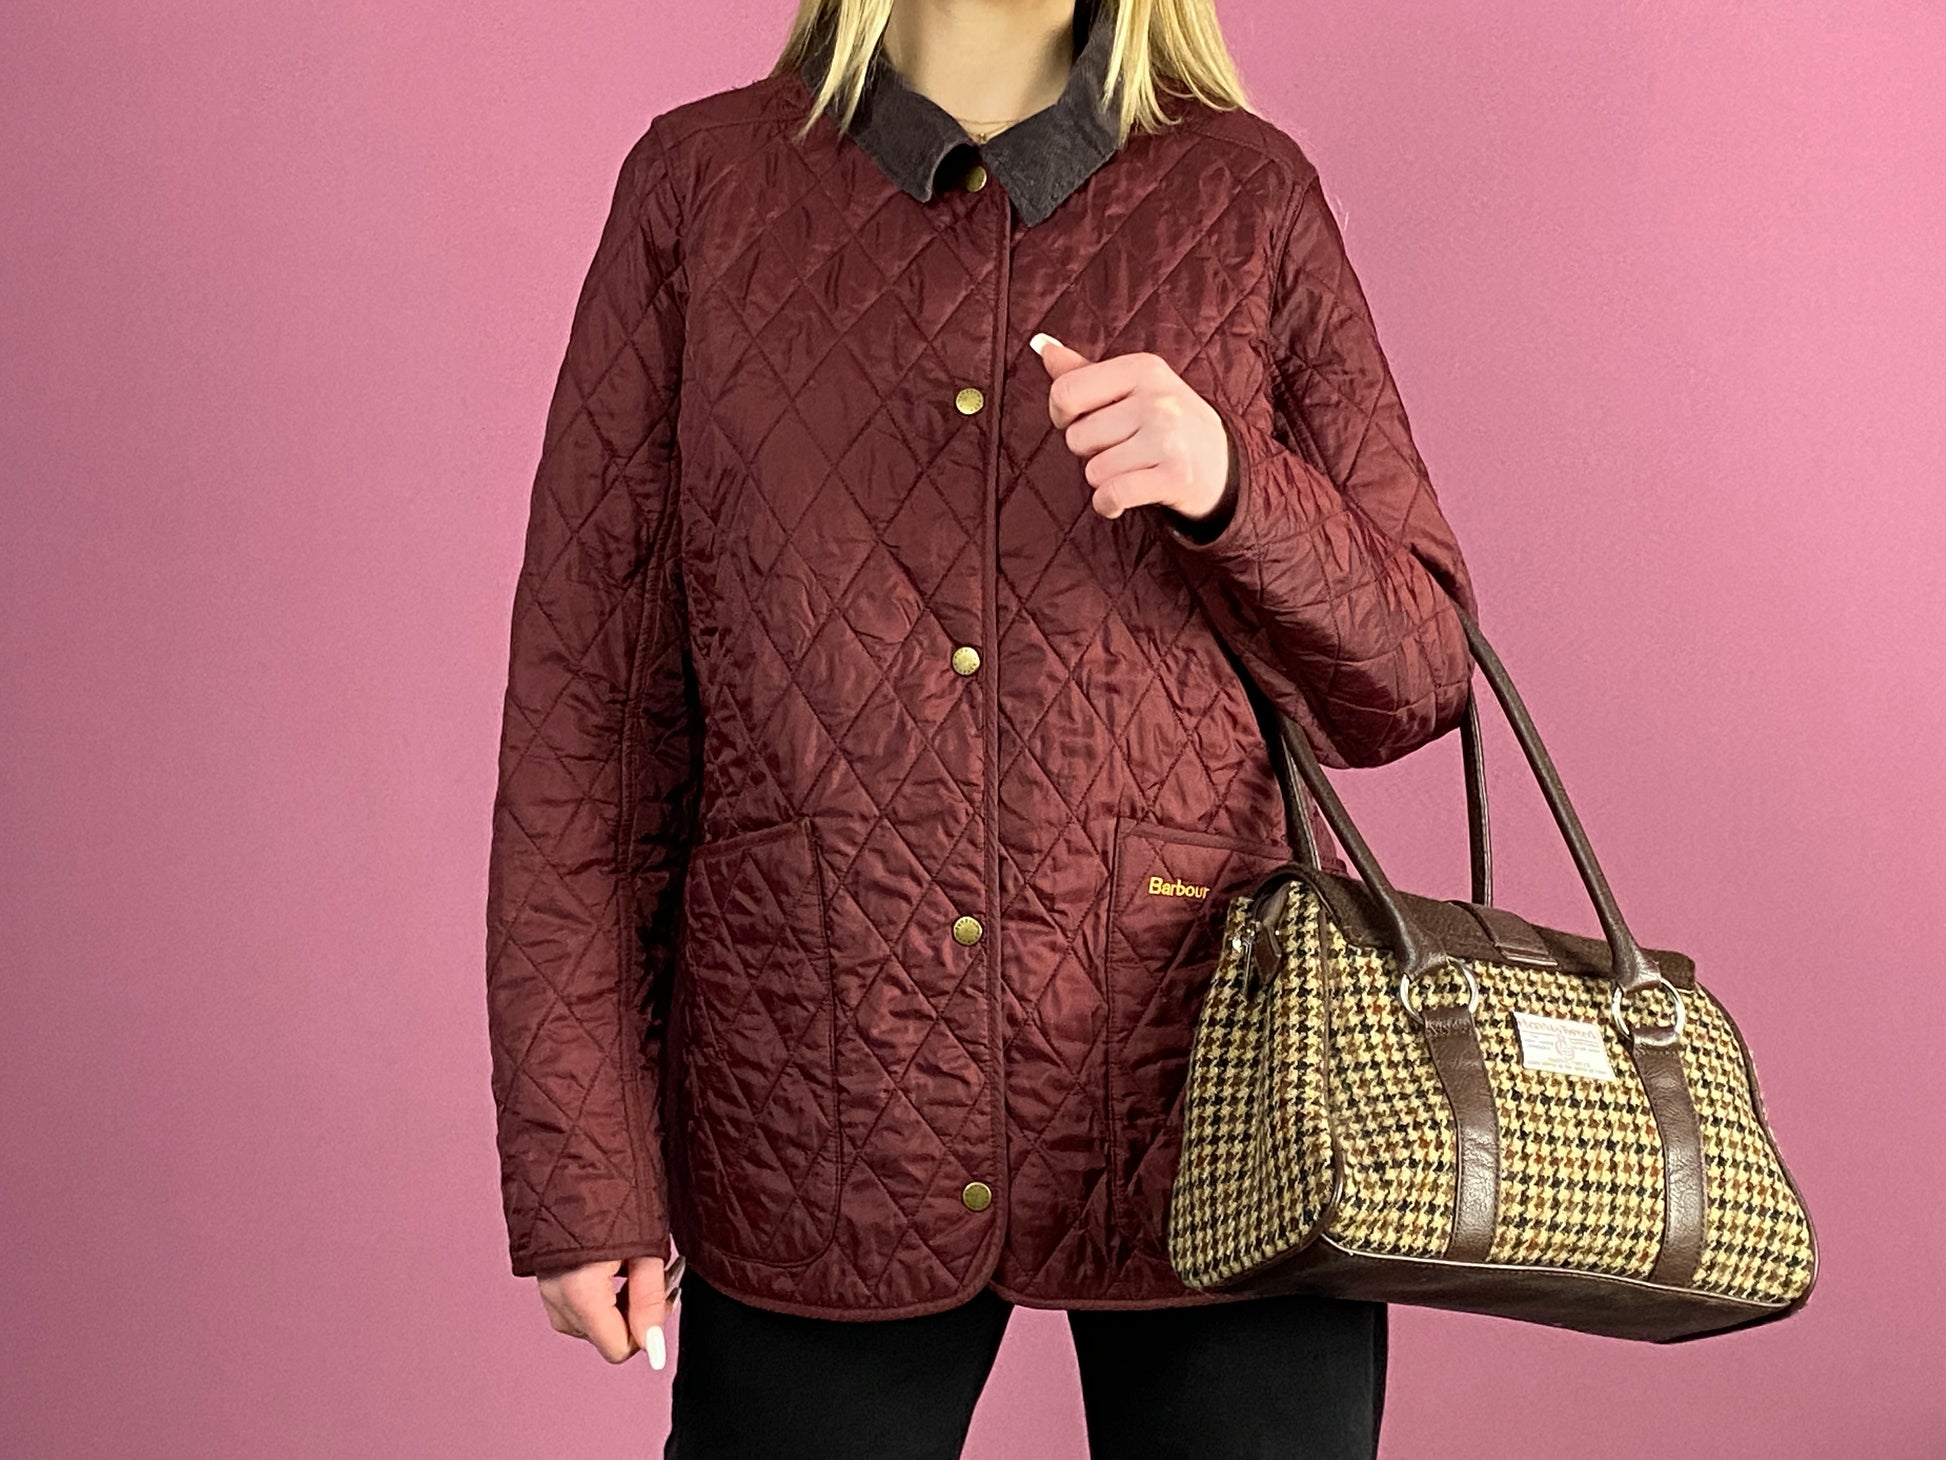 Barbour Vintage Women's Quilted Jacket - XL Burgundy Nylon